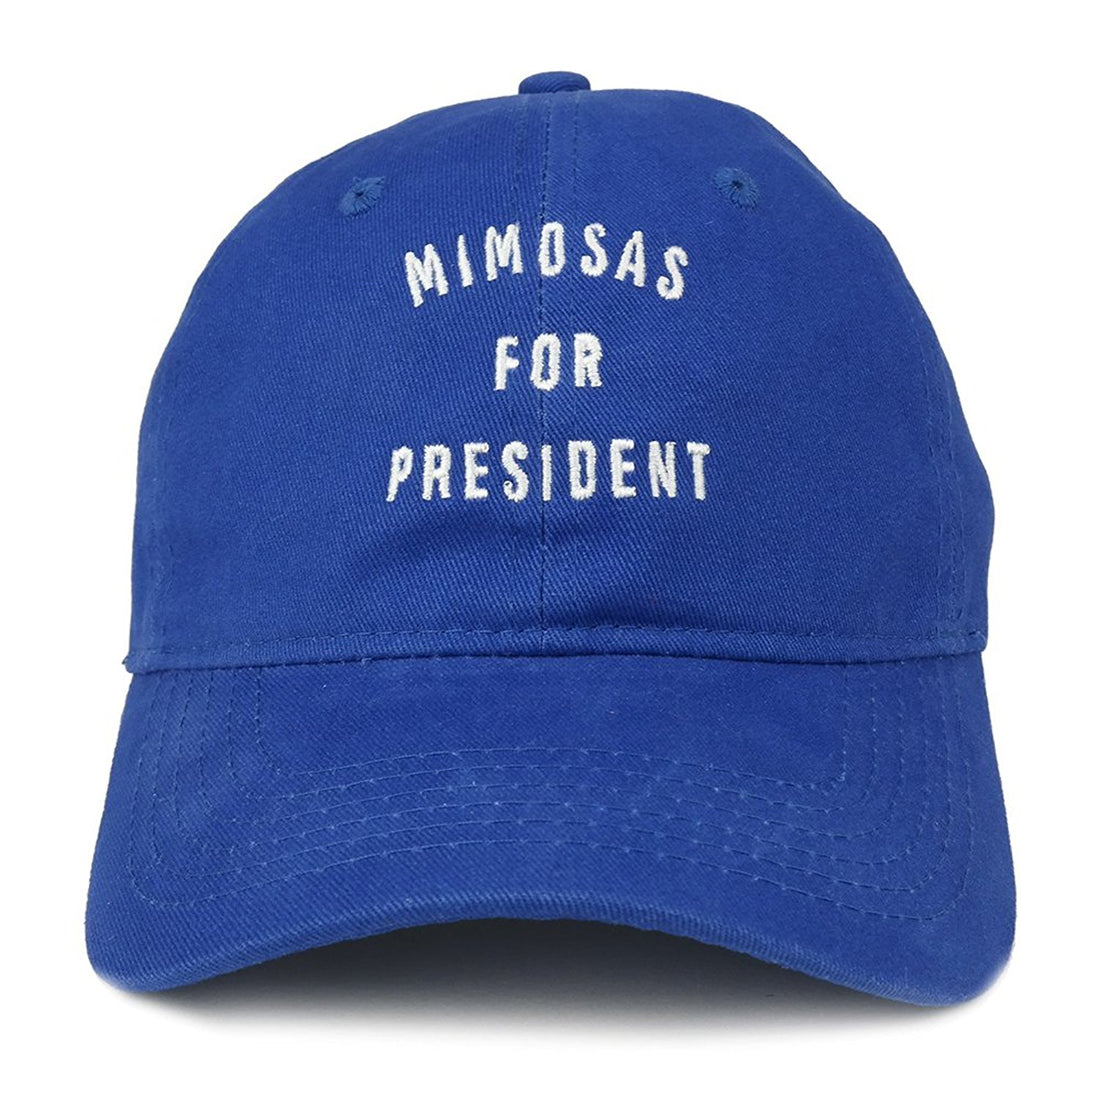 Trendy Apparel Shop Mimosas For President Embroidered 100% Cotton Adjustable Cap